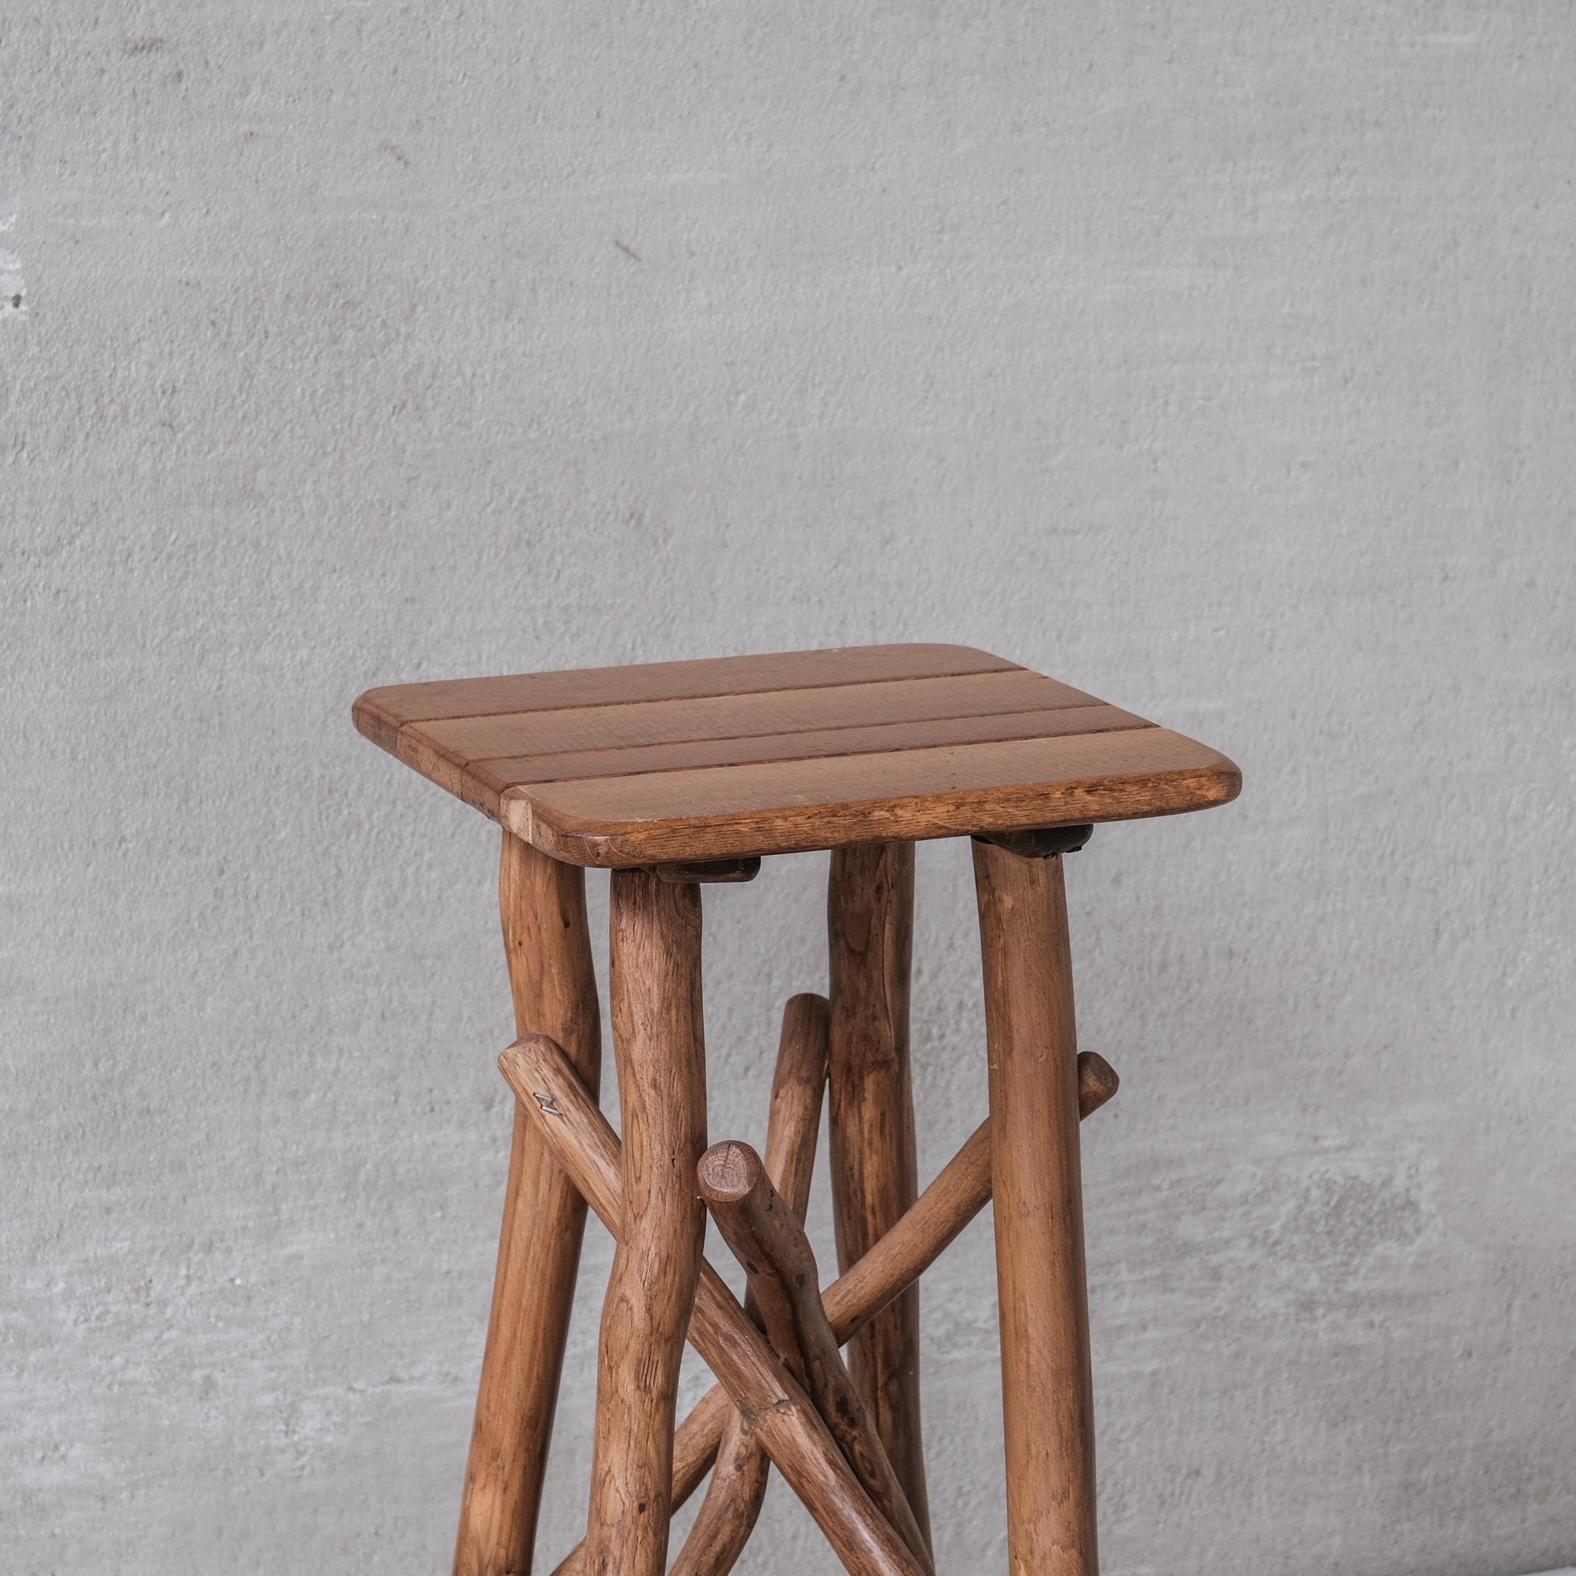 Wooden Midcentury Bar Stool or Sculpture Pedestal in Adirondack Style '6 Availa' In Good Condition For Sale In London, GB